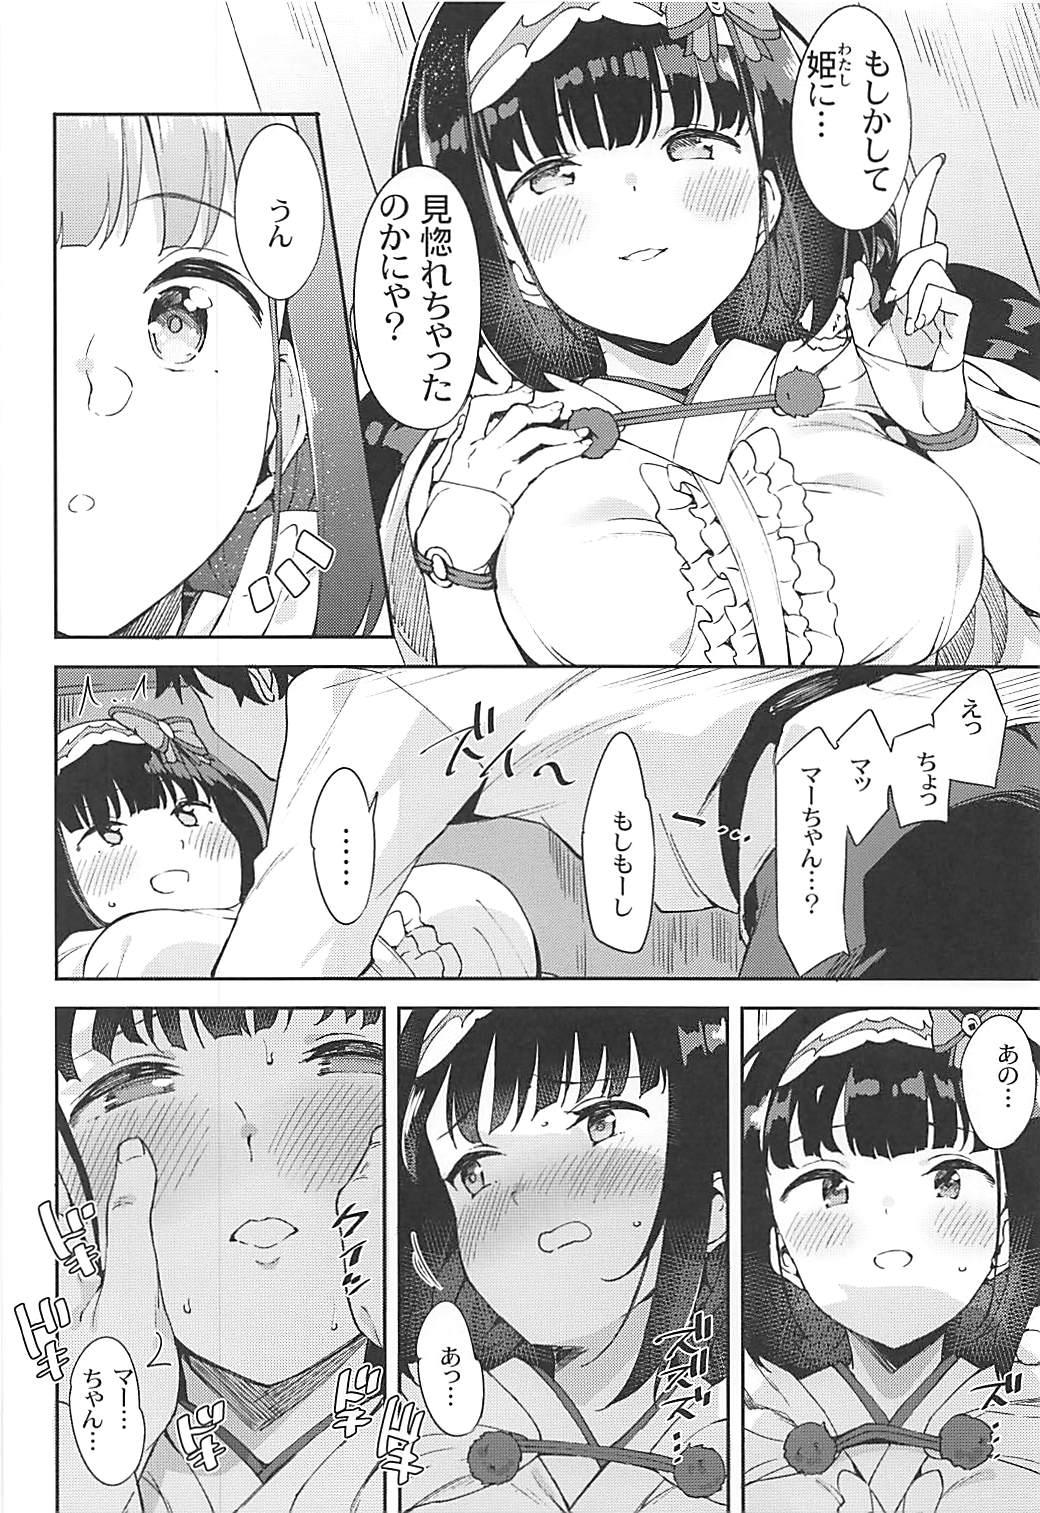 Rimjob Osakabehime to Himegoto - Fate grand order Shaved - Page 7